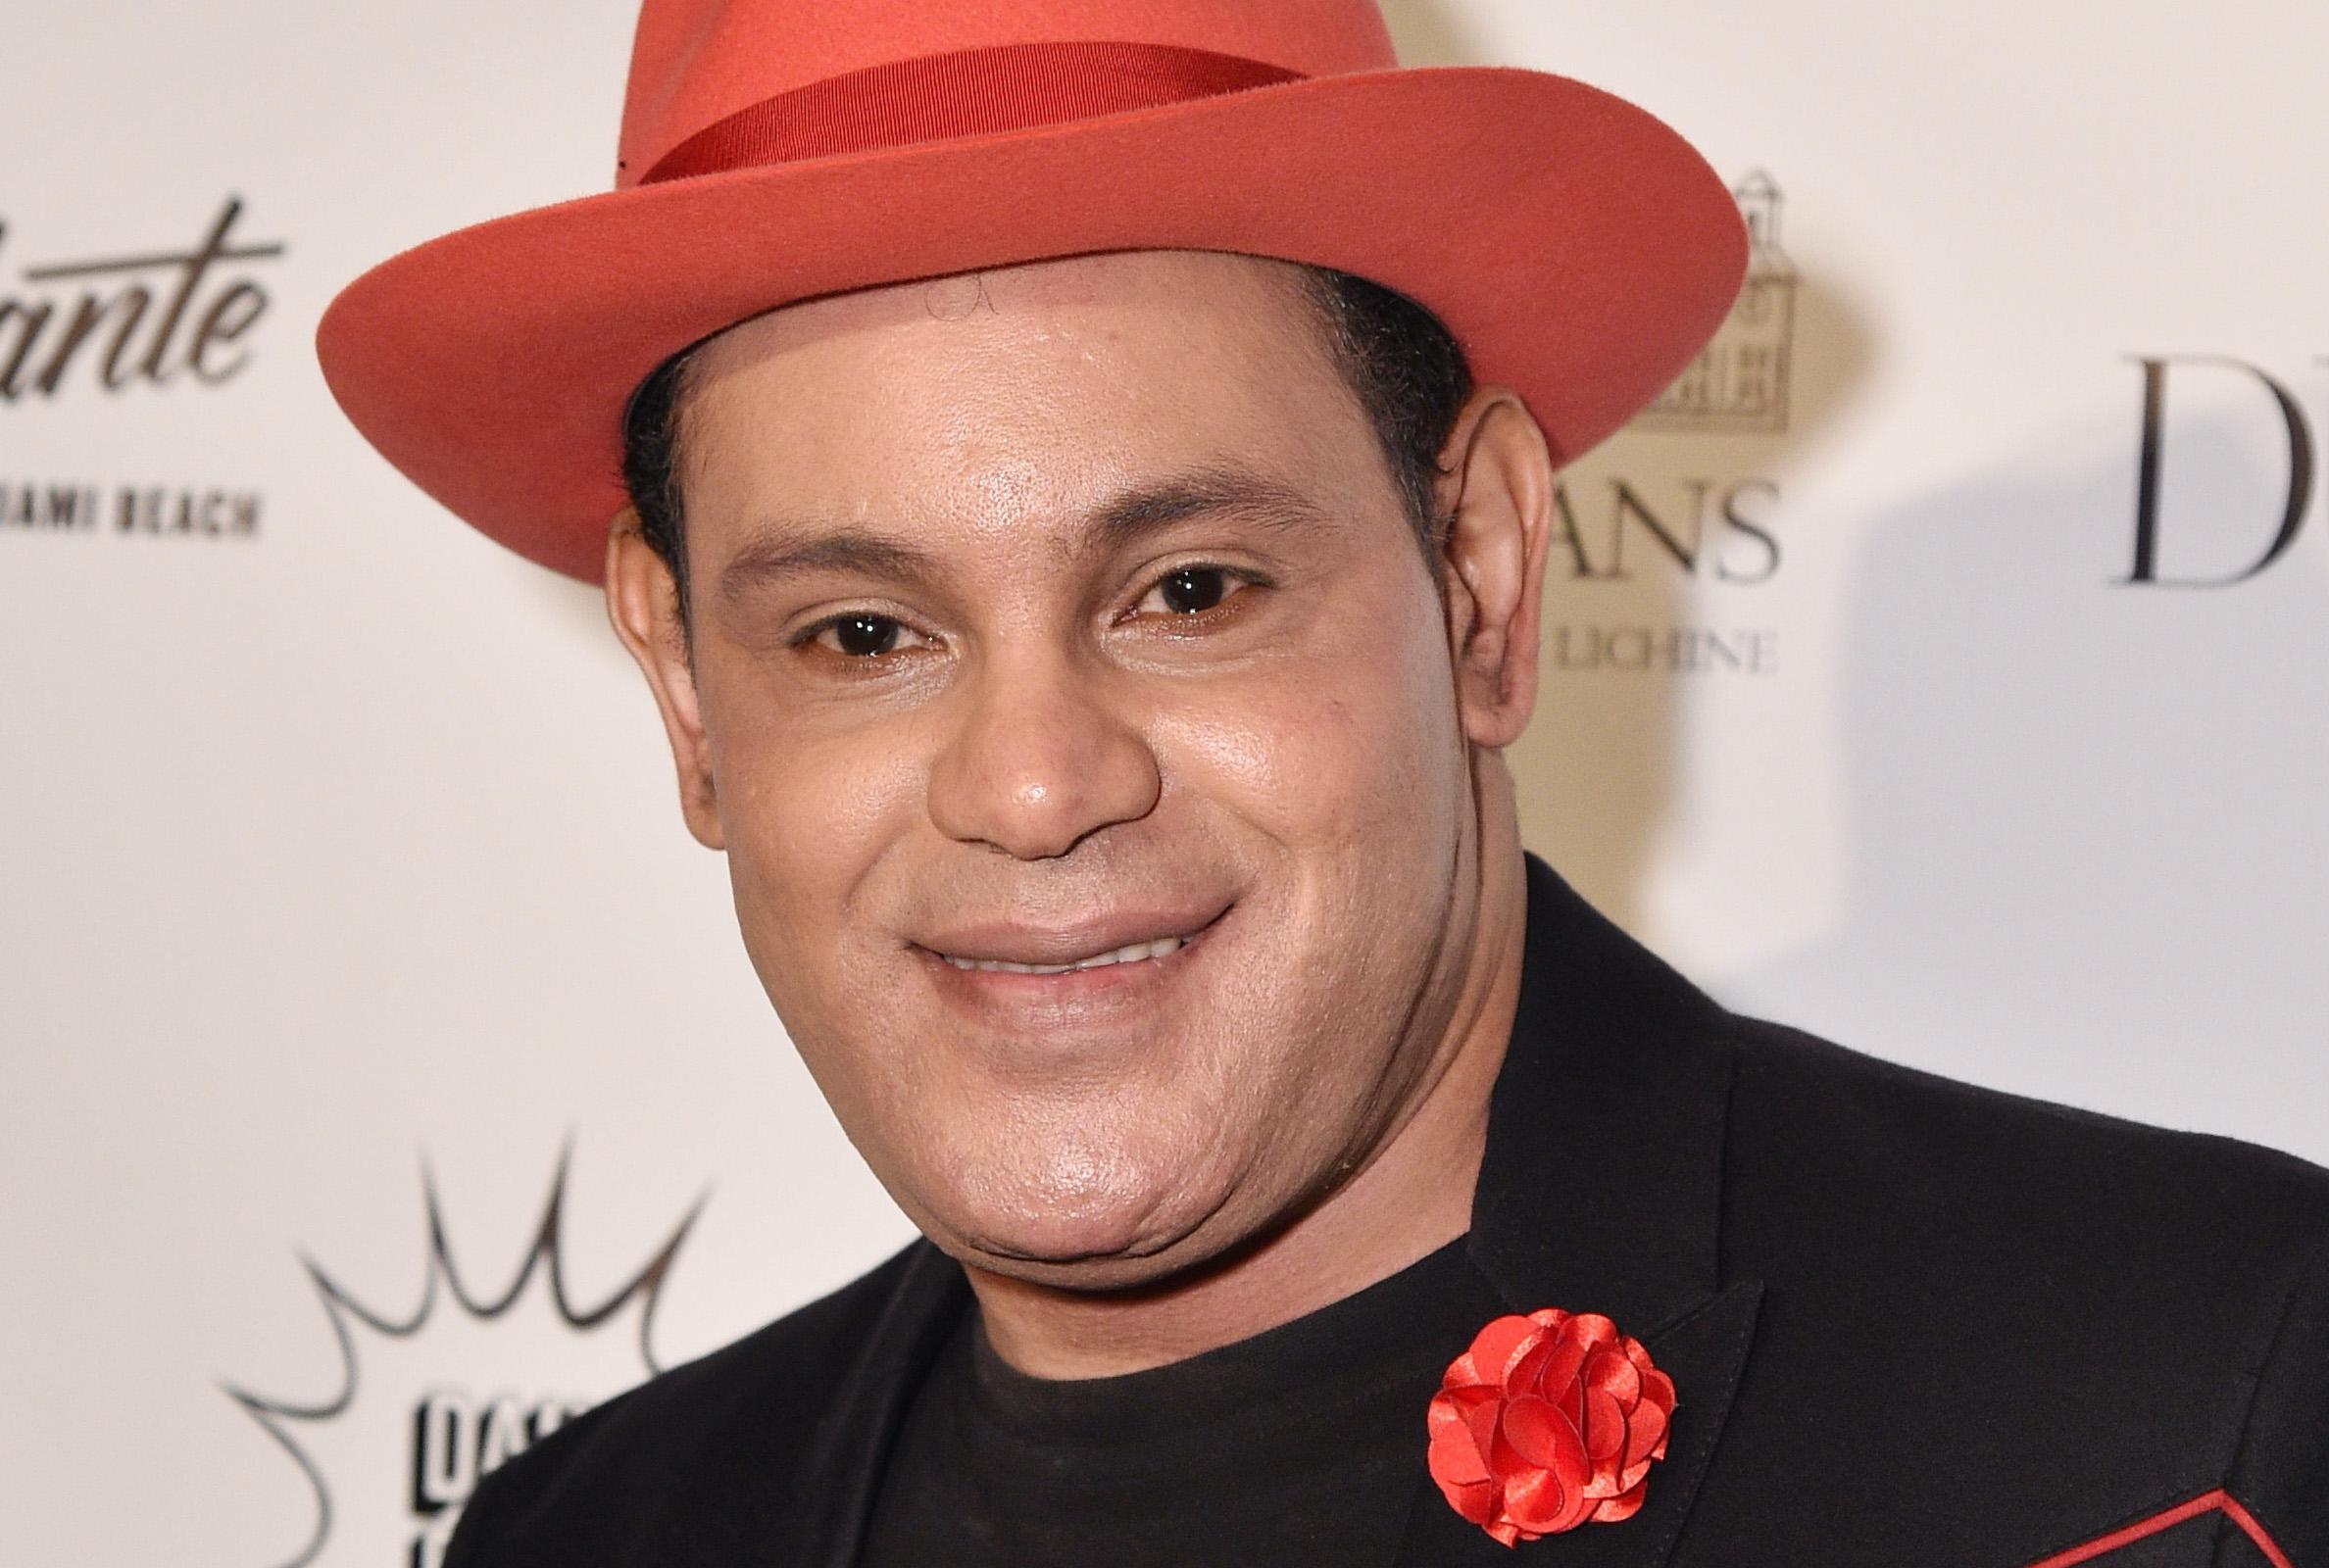 Latest Photos of Sammy Sosa Suggest His Skin Is Lighter Than Ever